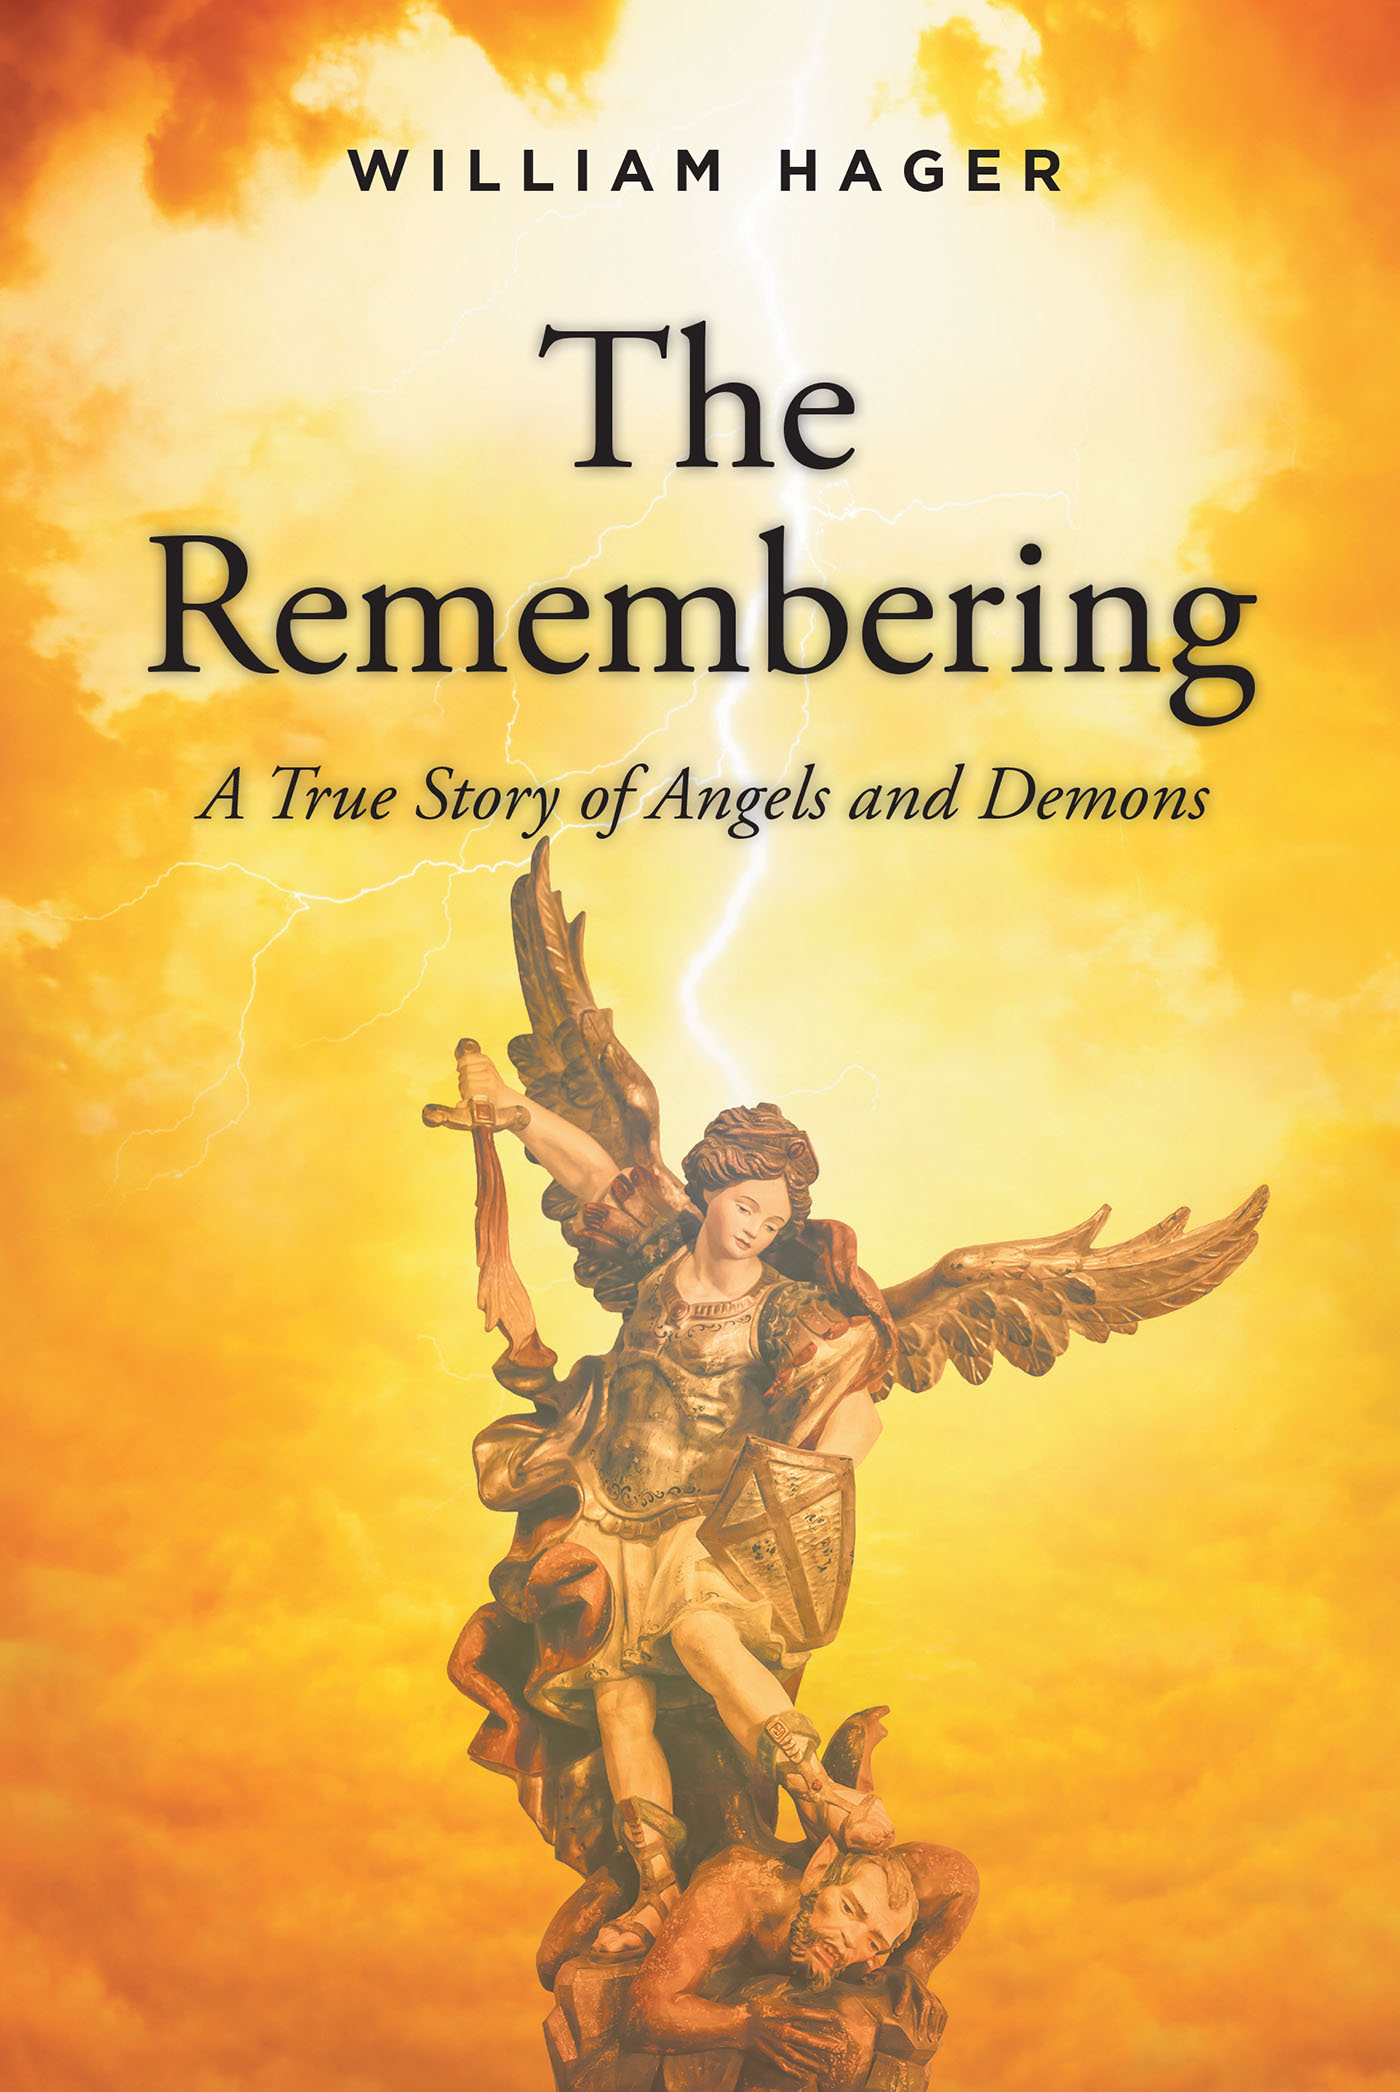 William Hager’s New Book, “The Remembering: A True Story of Angels and Demons,” is a Gripping Firsthand, First-Person Account of an Attempted Demonic Possession